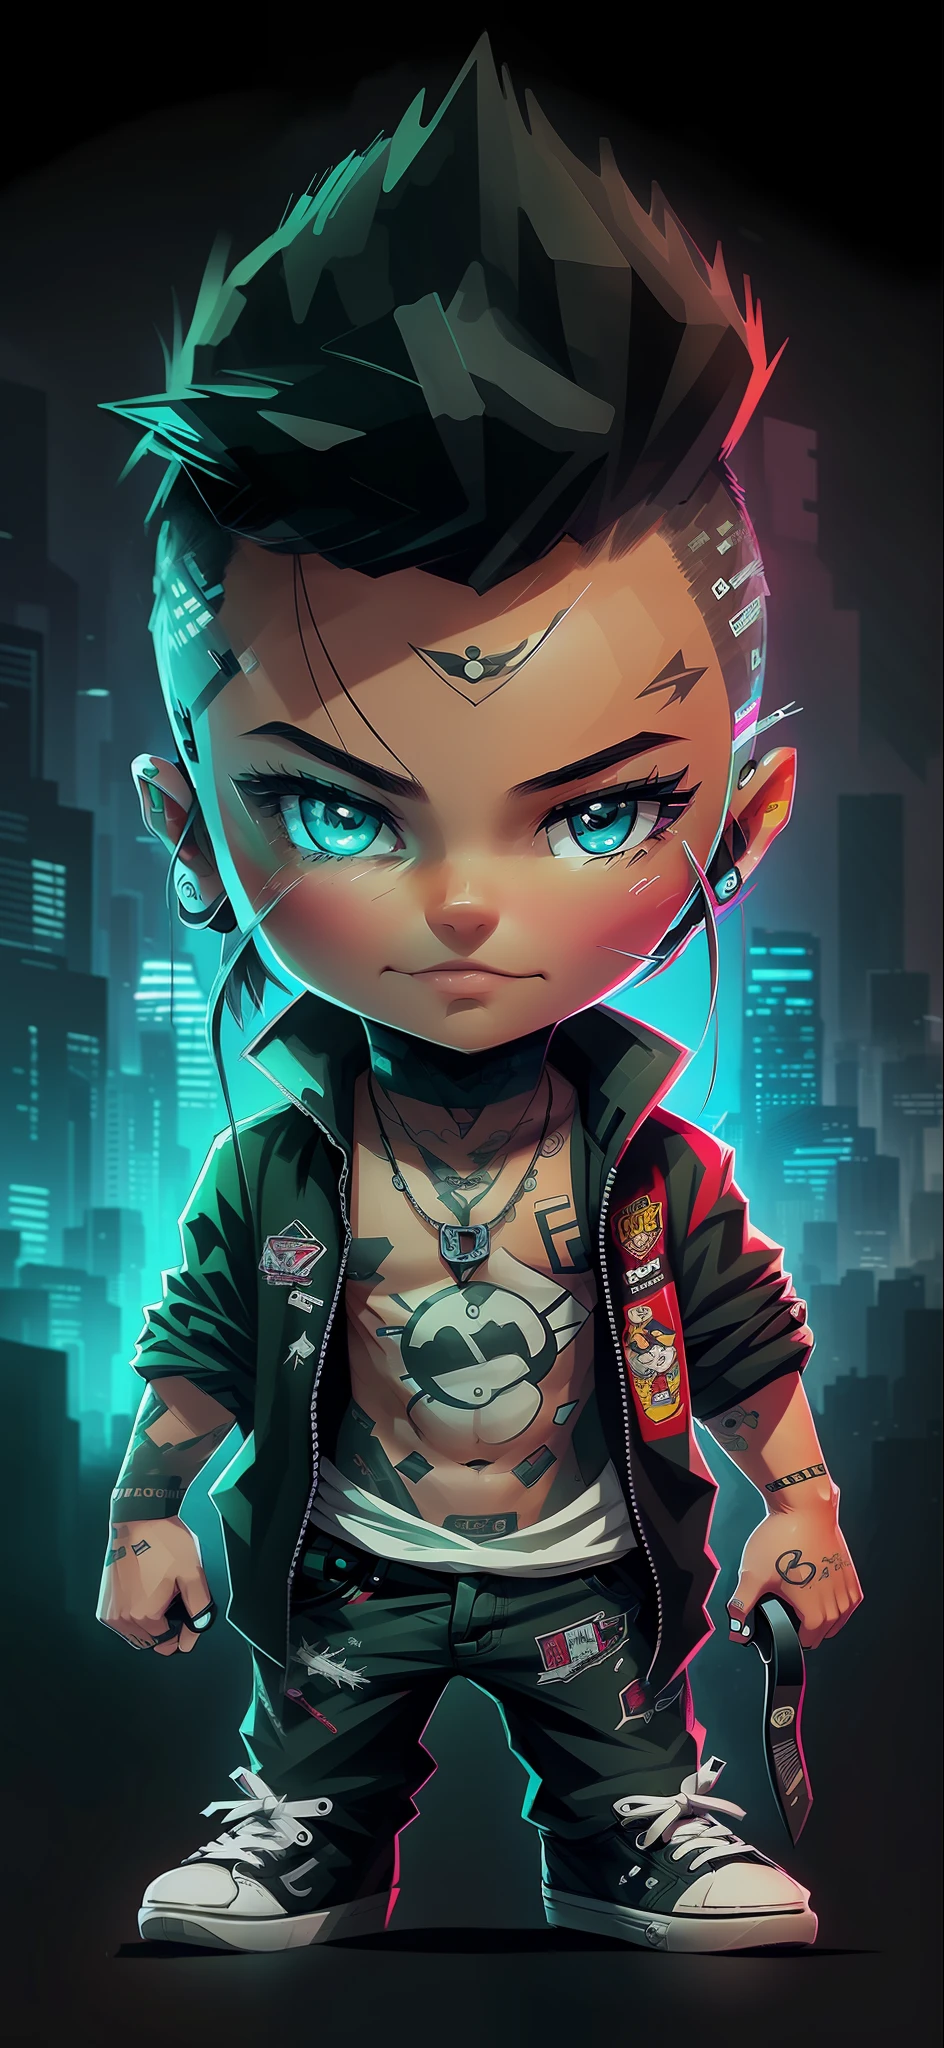 a cartoon character of a young boy with tattoos and piercings, phone wallpaper hd, epic digital art illustration, high quality wallpaper, hd phone wallpaper, amazing wallpaper, mobile wallpaper, stylized digital art, hd wallpaper, phone wallpaper, hd artwork, wallpaper mobile, wallpaper hd, cartoon art, cute artwork, cartoon digital art, cartoon art style, phone background --auto --s2